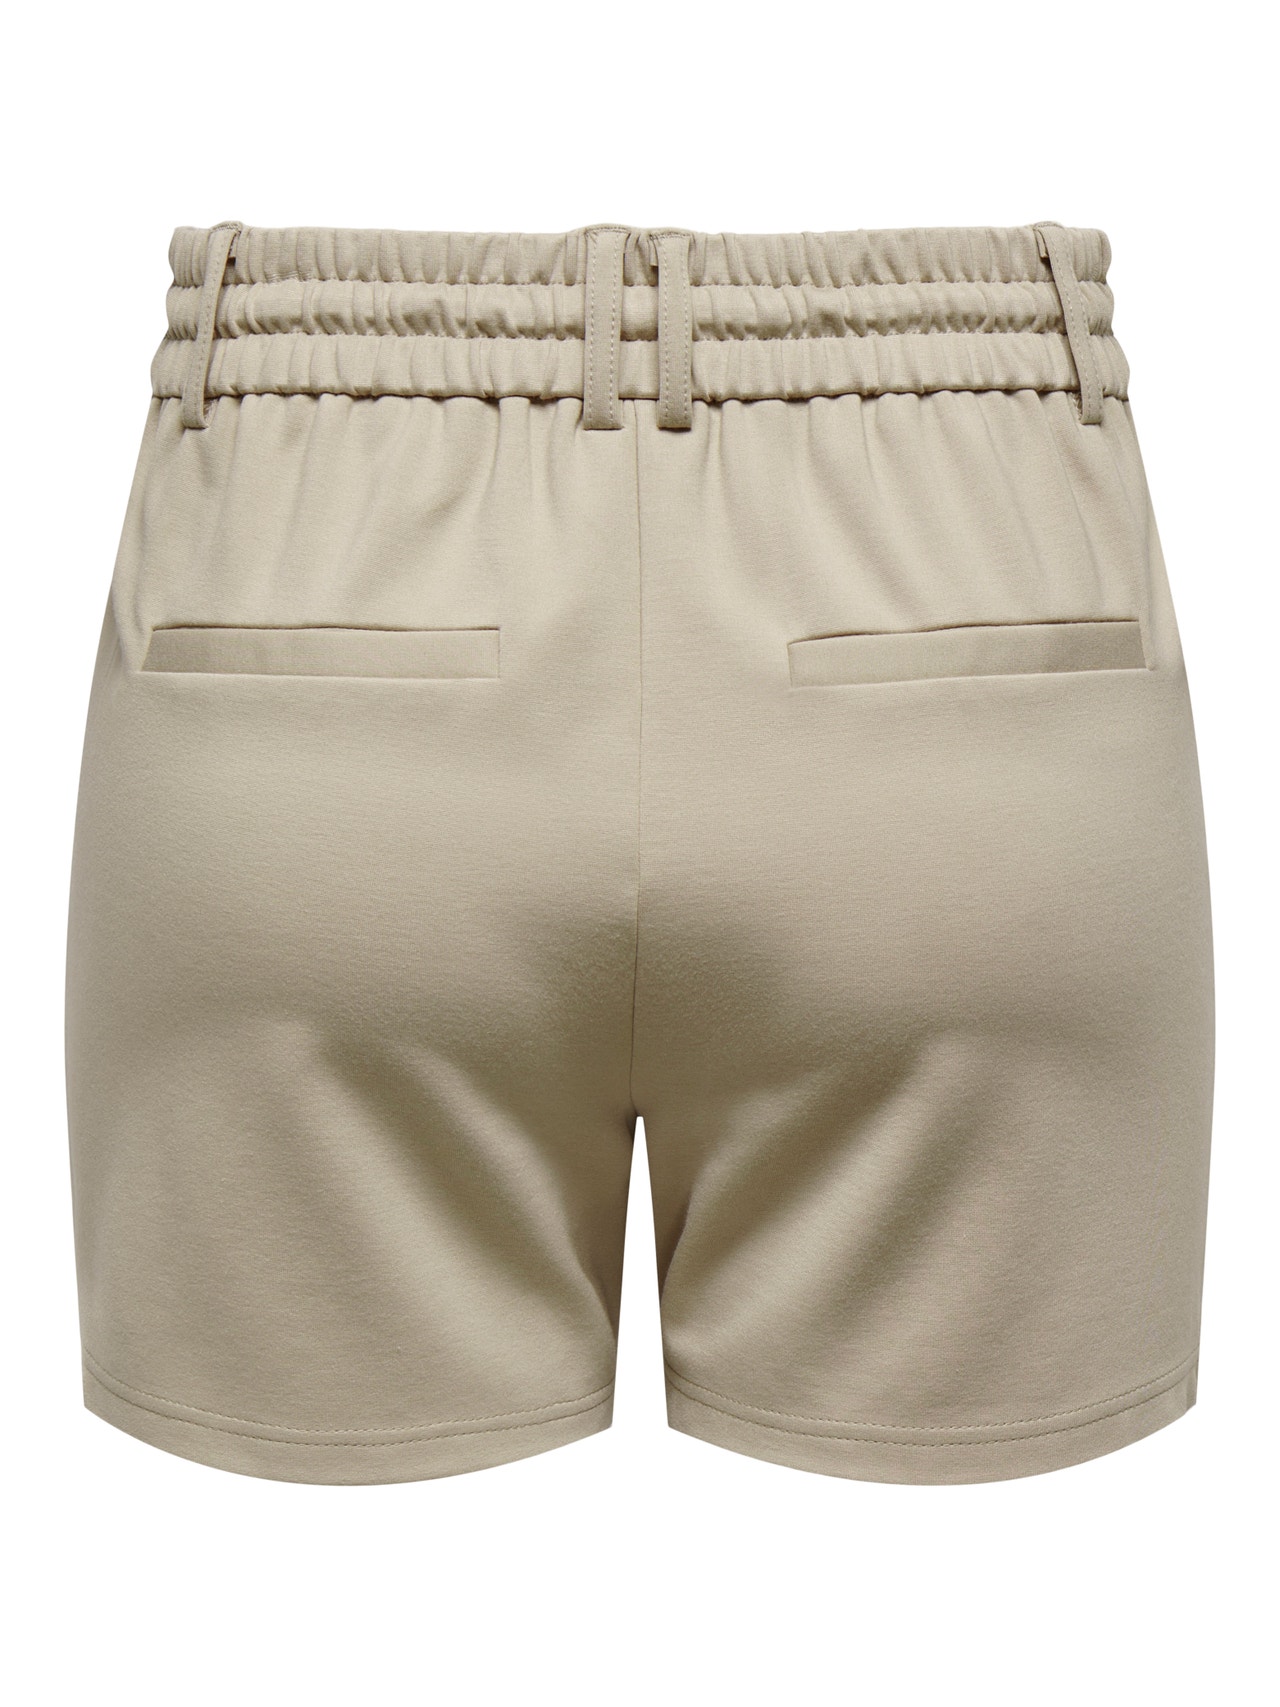 GOZYLA Women's Summer Shorts, Elegant Fabric Summer Shorts with Pockets,  Loose Fit Bermuda Shorts, Summer Shorts for Teenagers (Color : Beige, Size  : S) : : Fashion